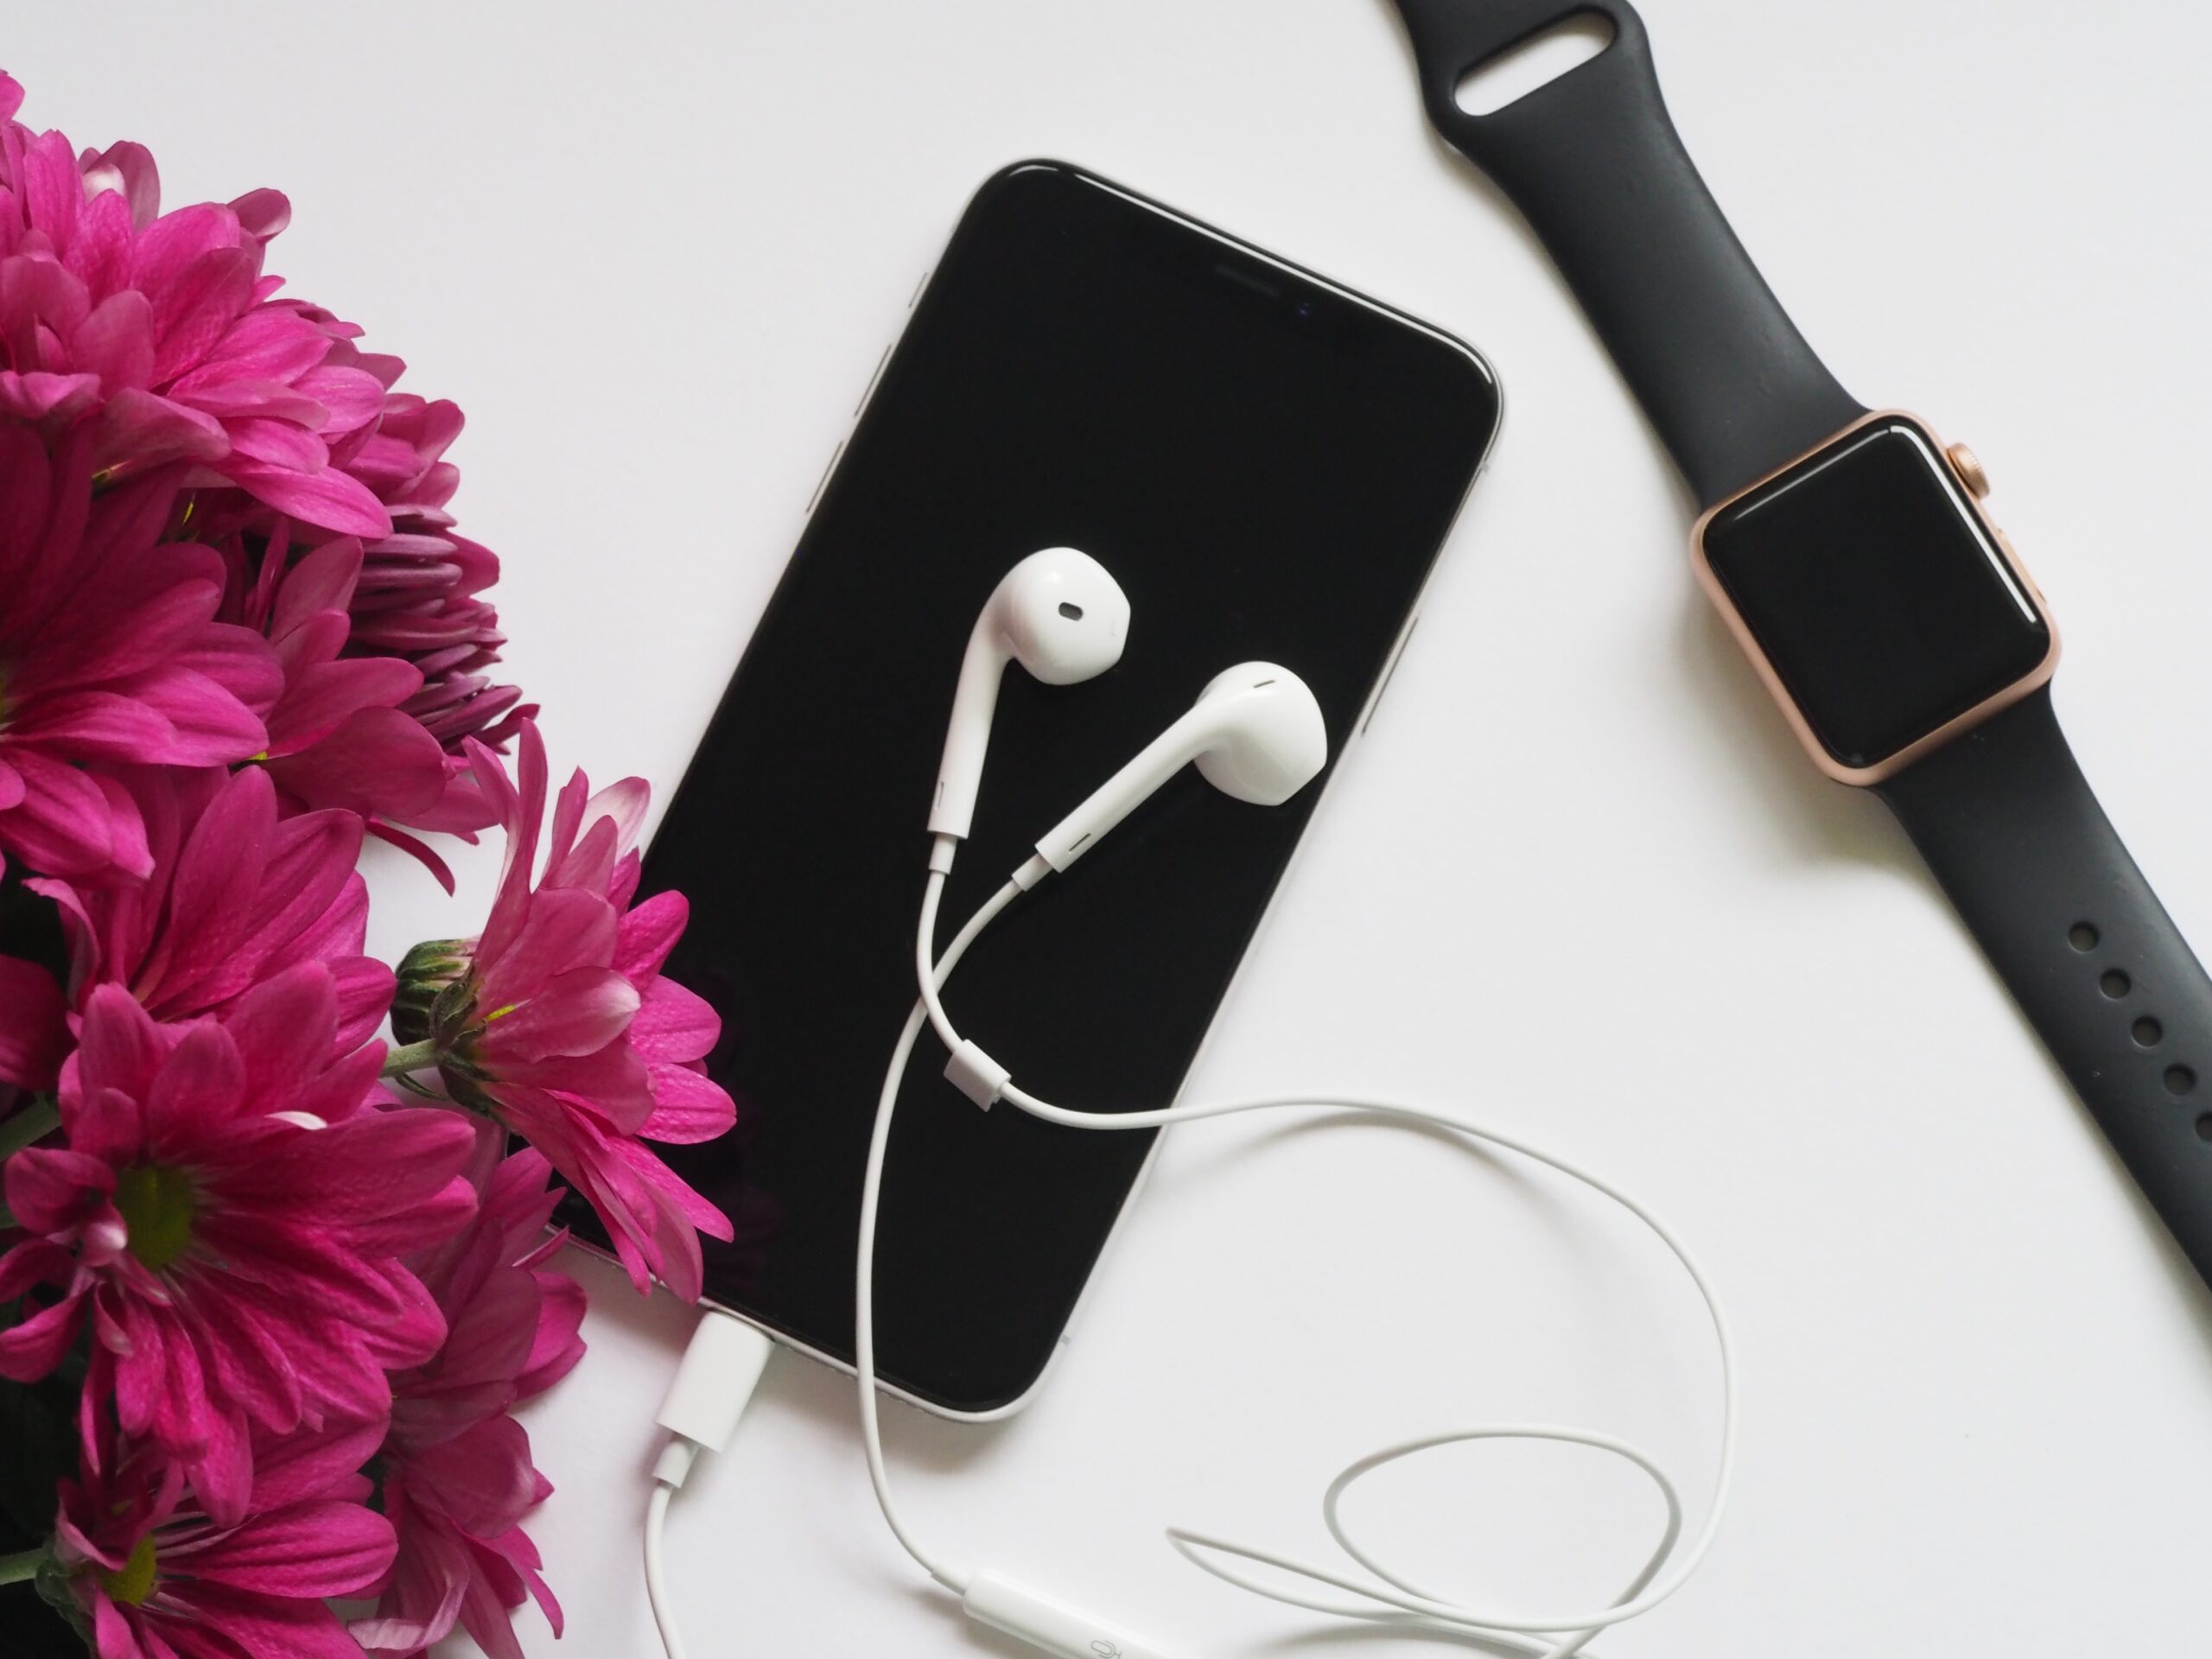 Podcasts on the go: A Beginner’s Guide to Listening on Your iPhone